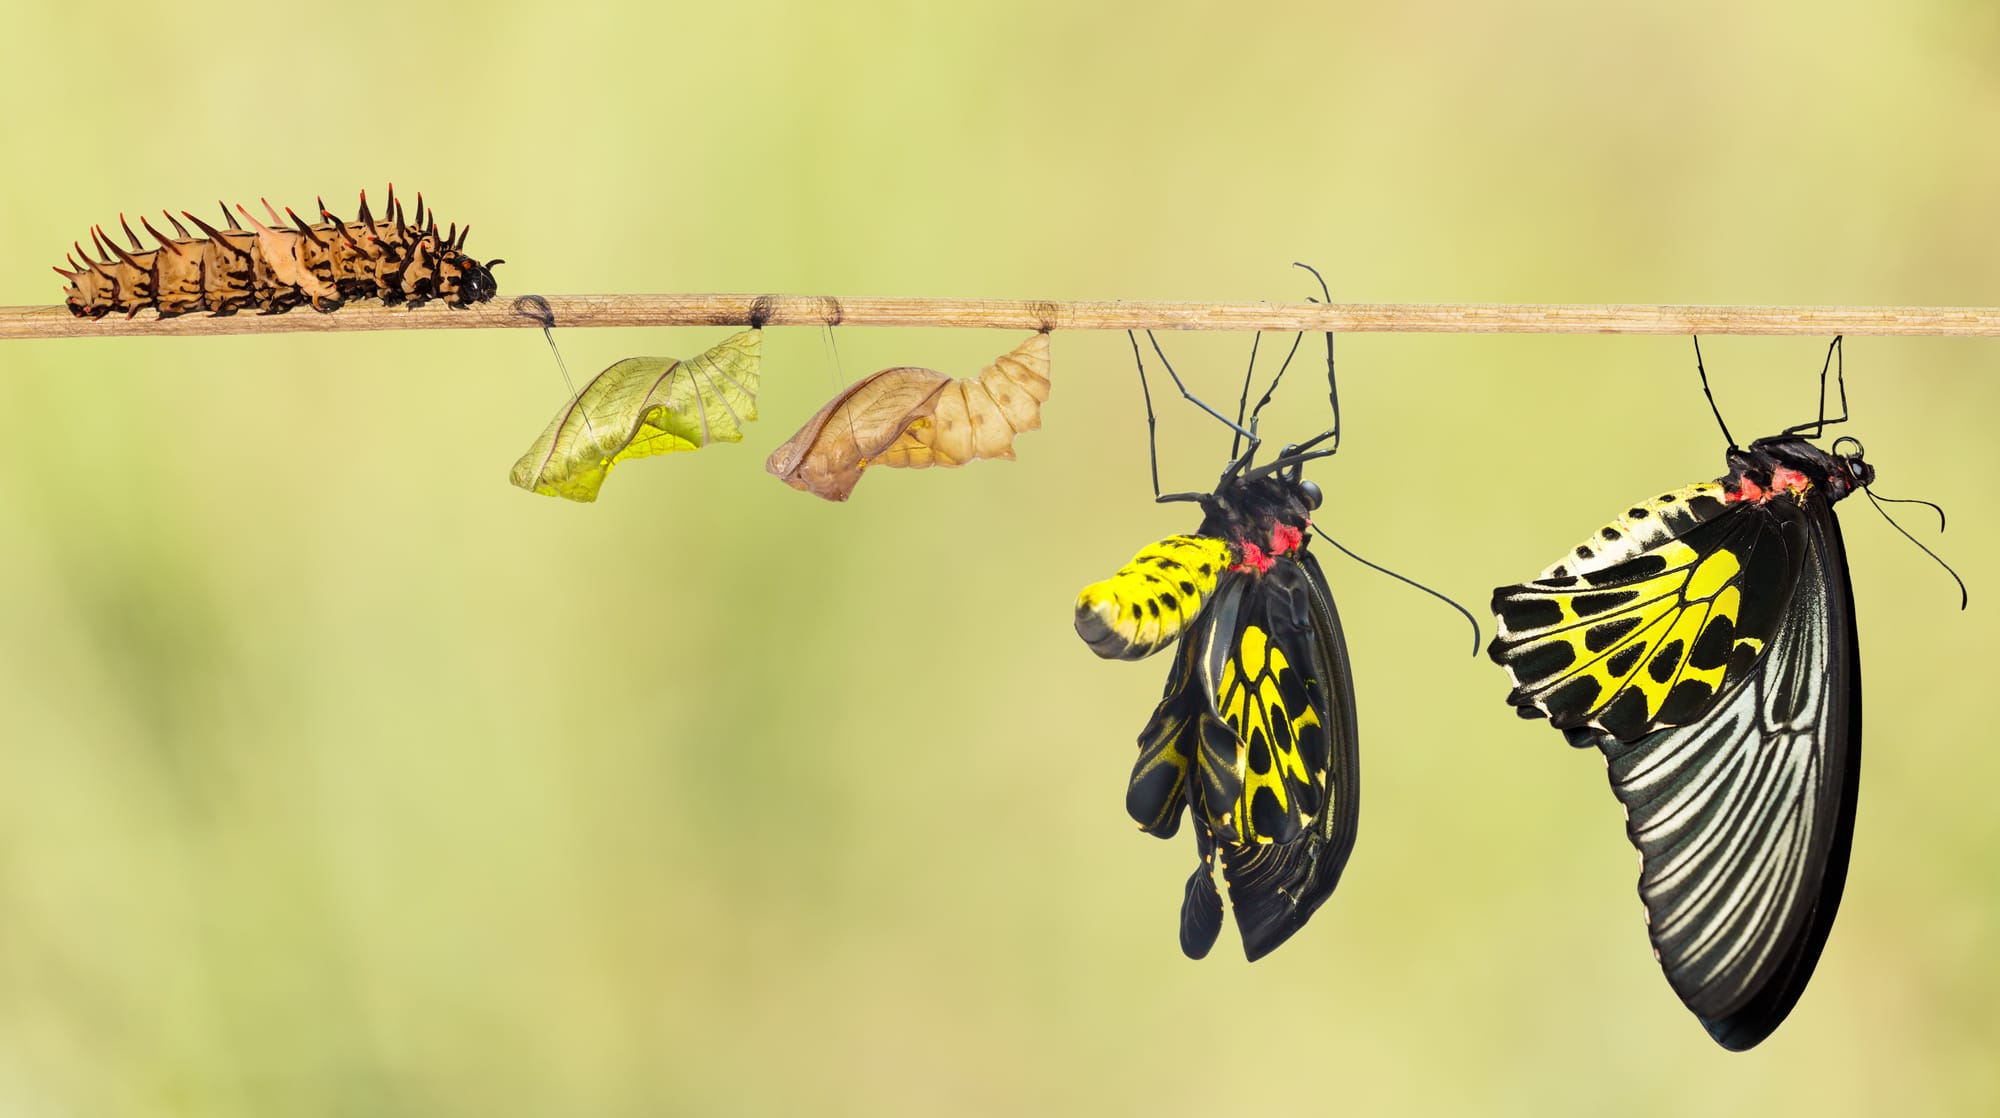 Lifecycle of a birdwing butterfly depicted on a stick.